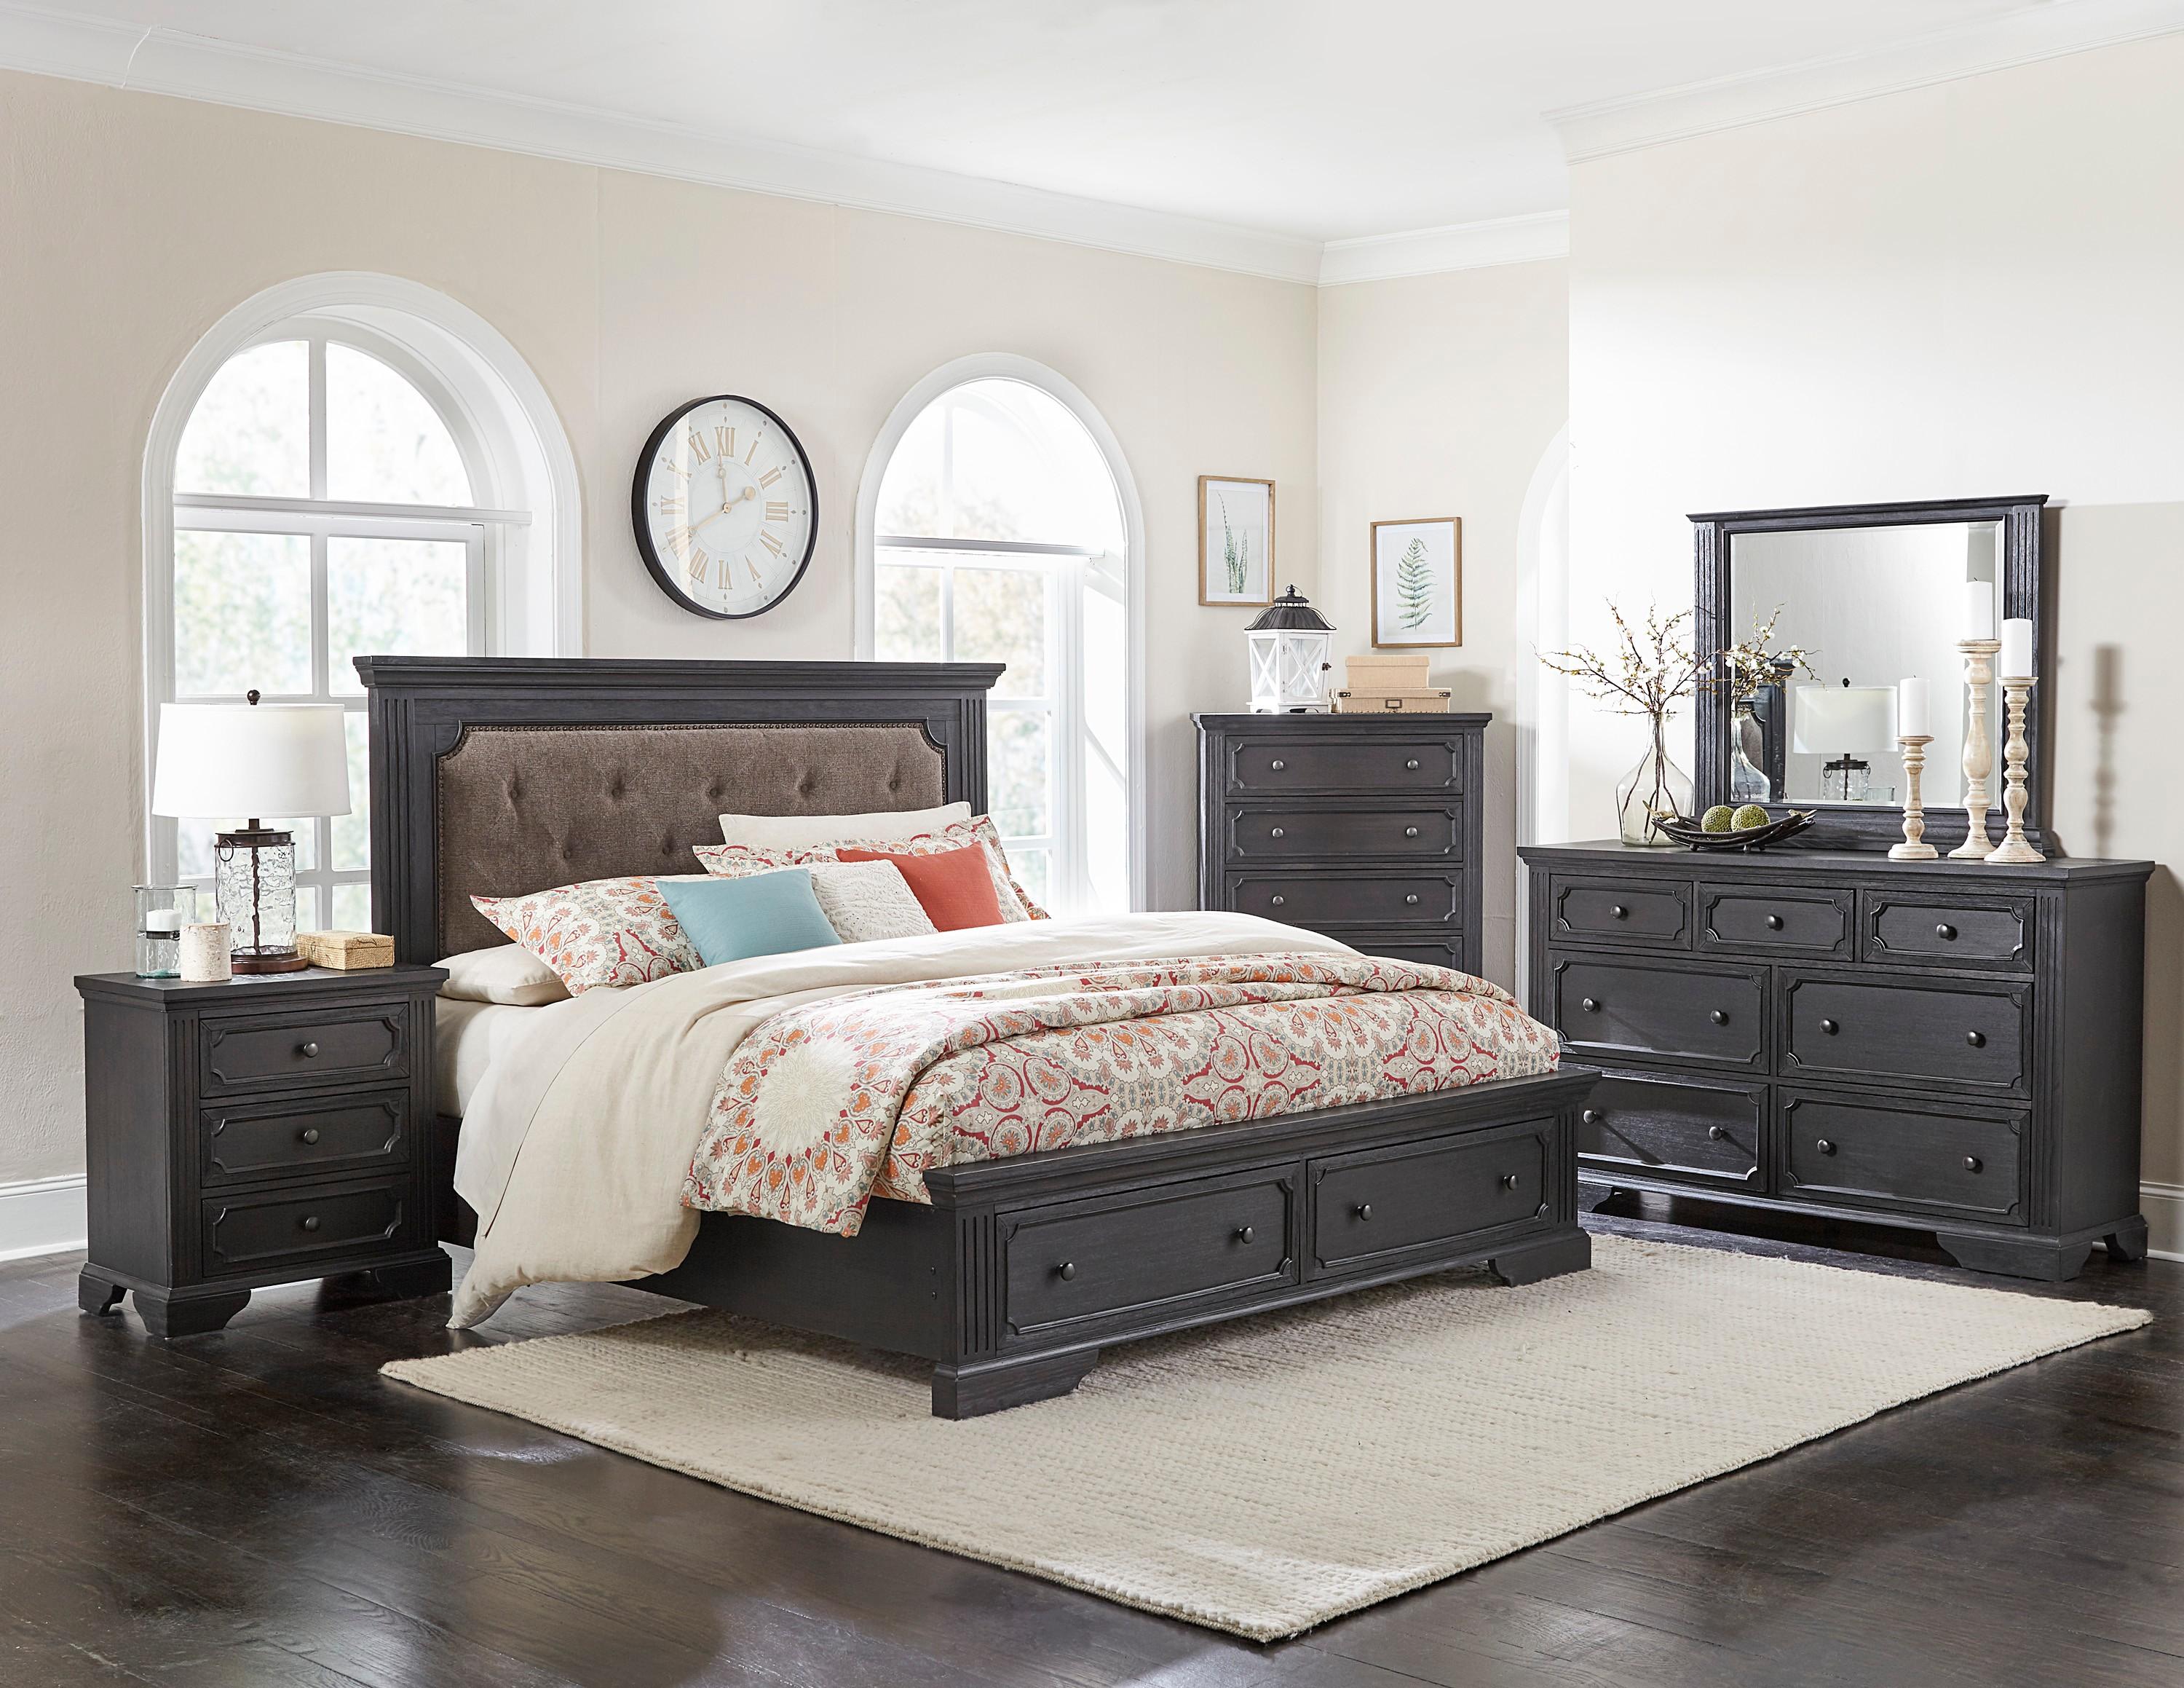 Rustic Bedroom Set 1647-1-6PC Bolingbrook 1647-1-6PC in Charcoal Polyester